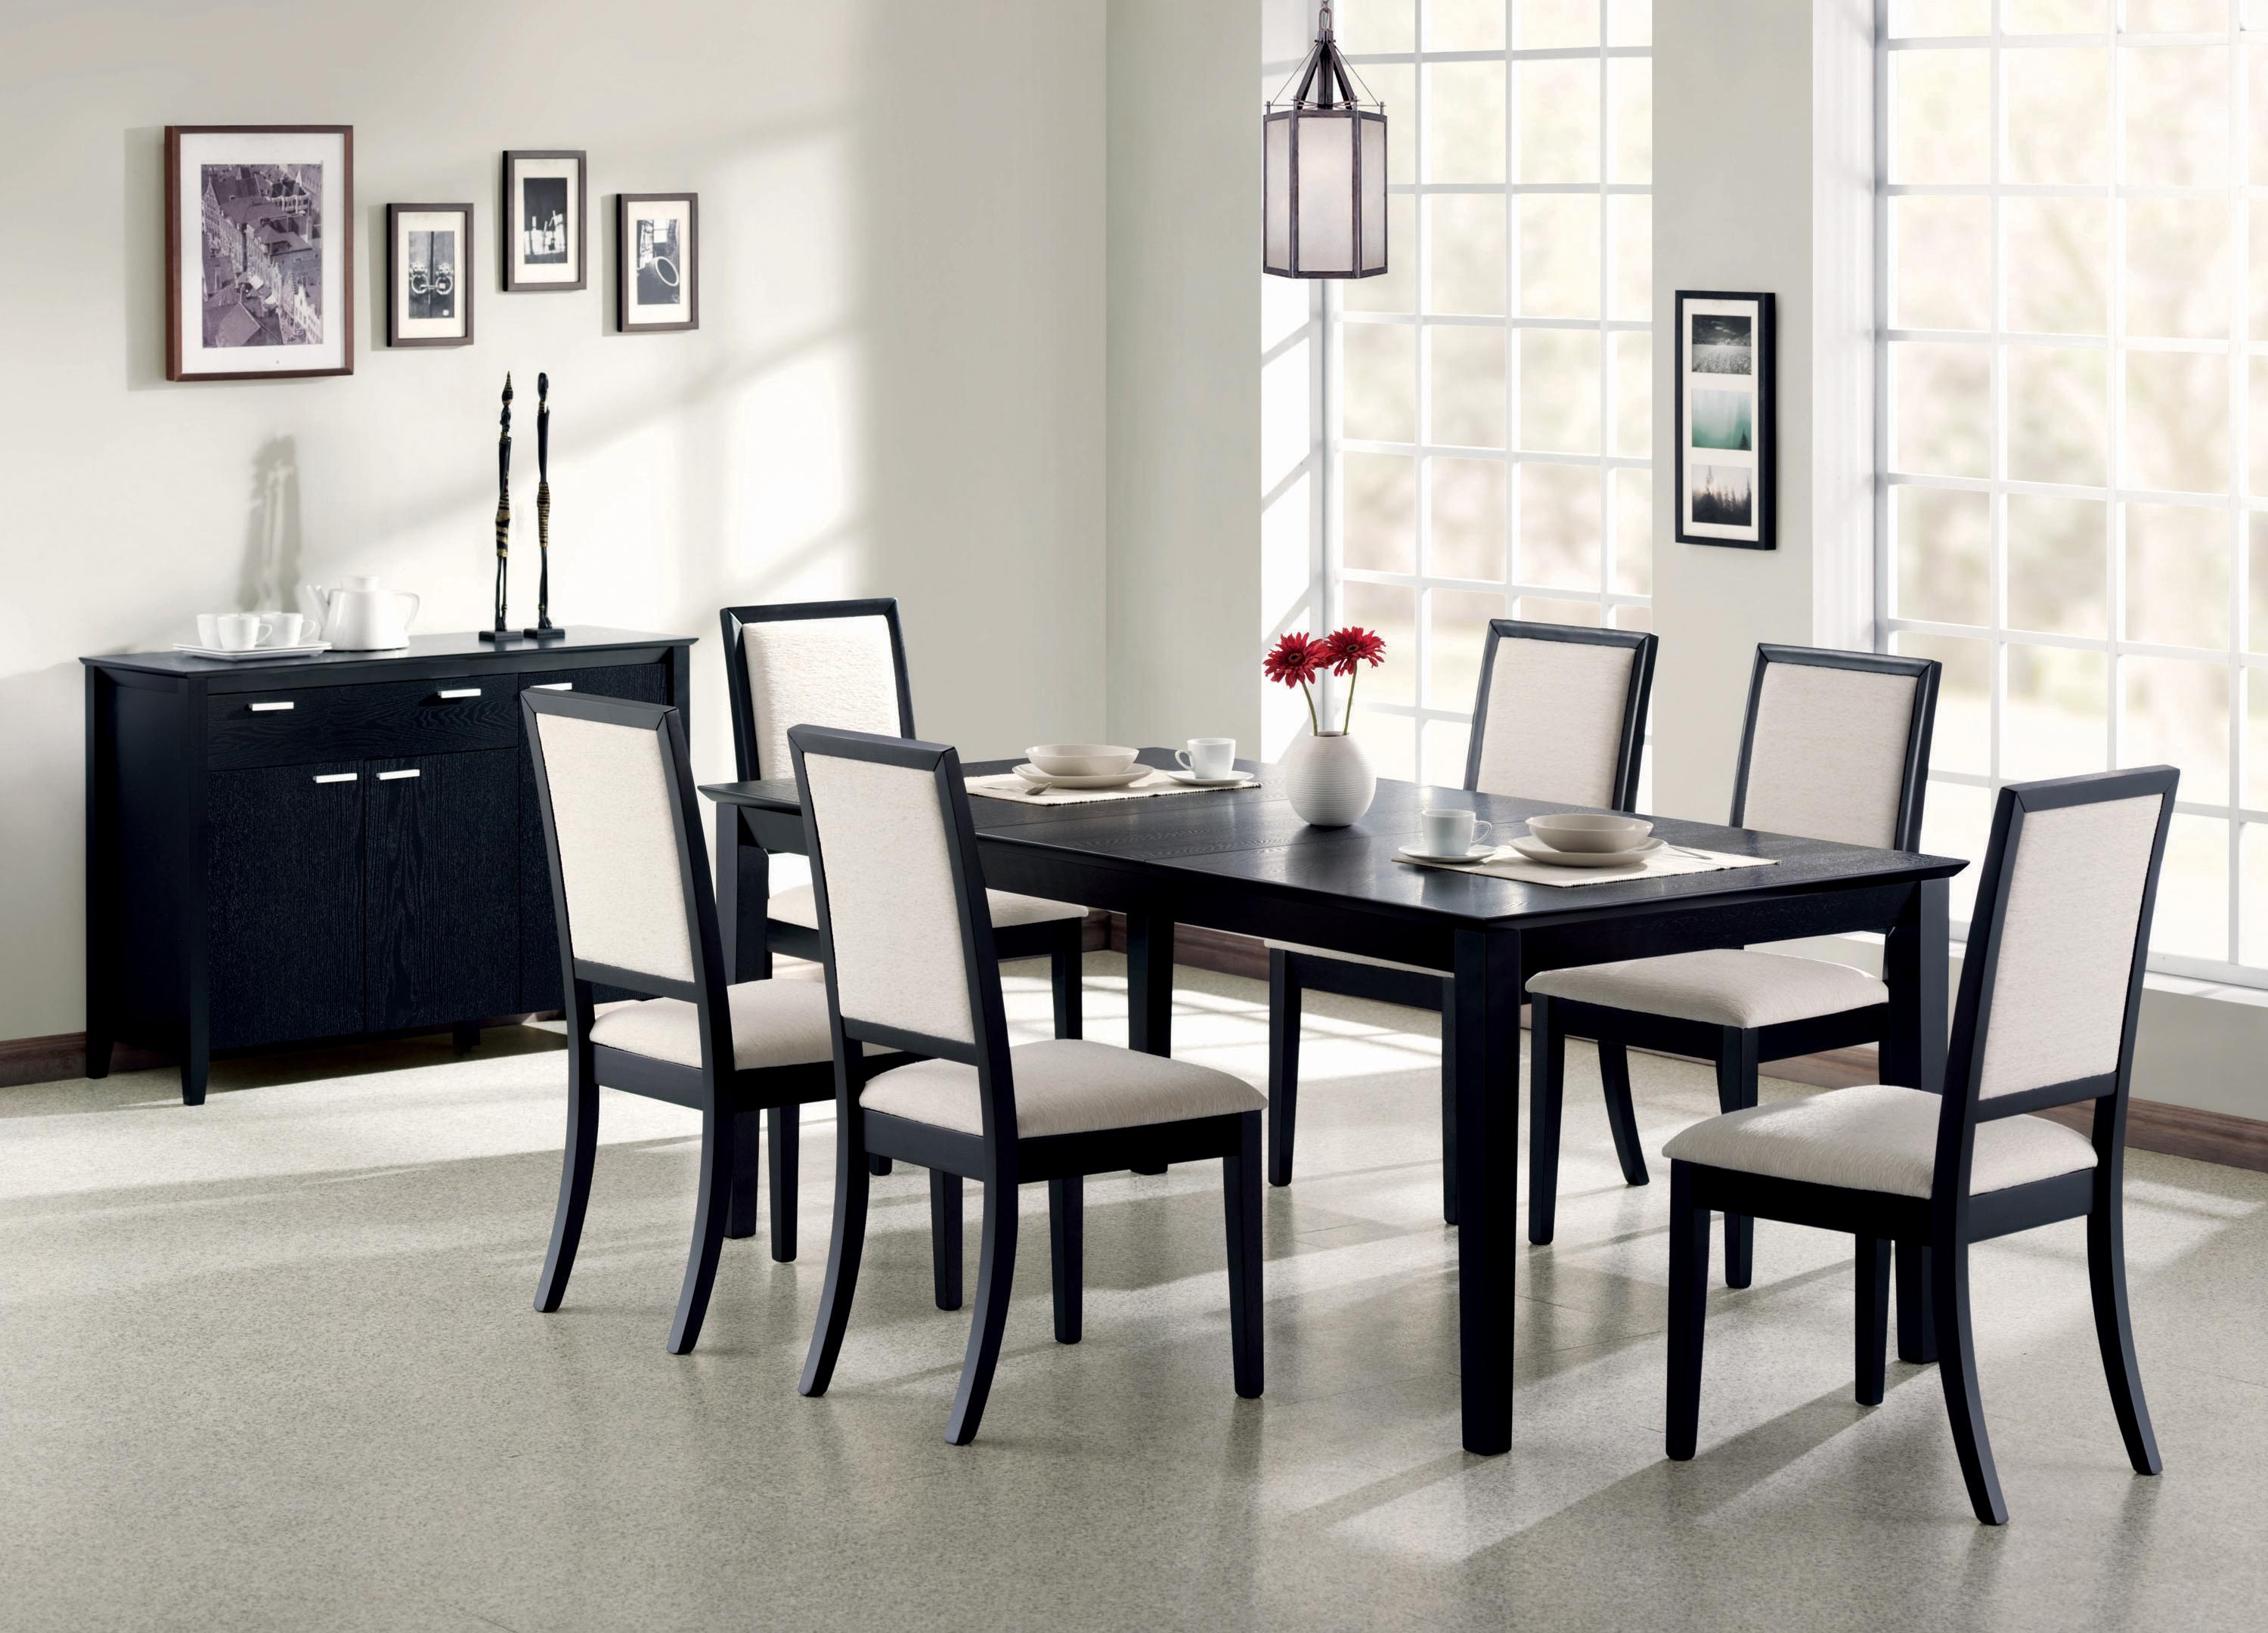 Modern Dining Room Set 101561-S5 Louise 101561-S5 in Black Fabric